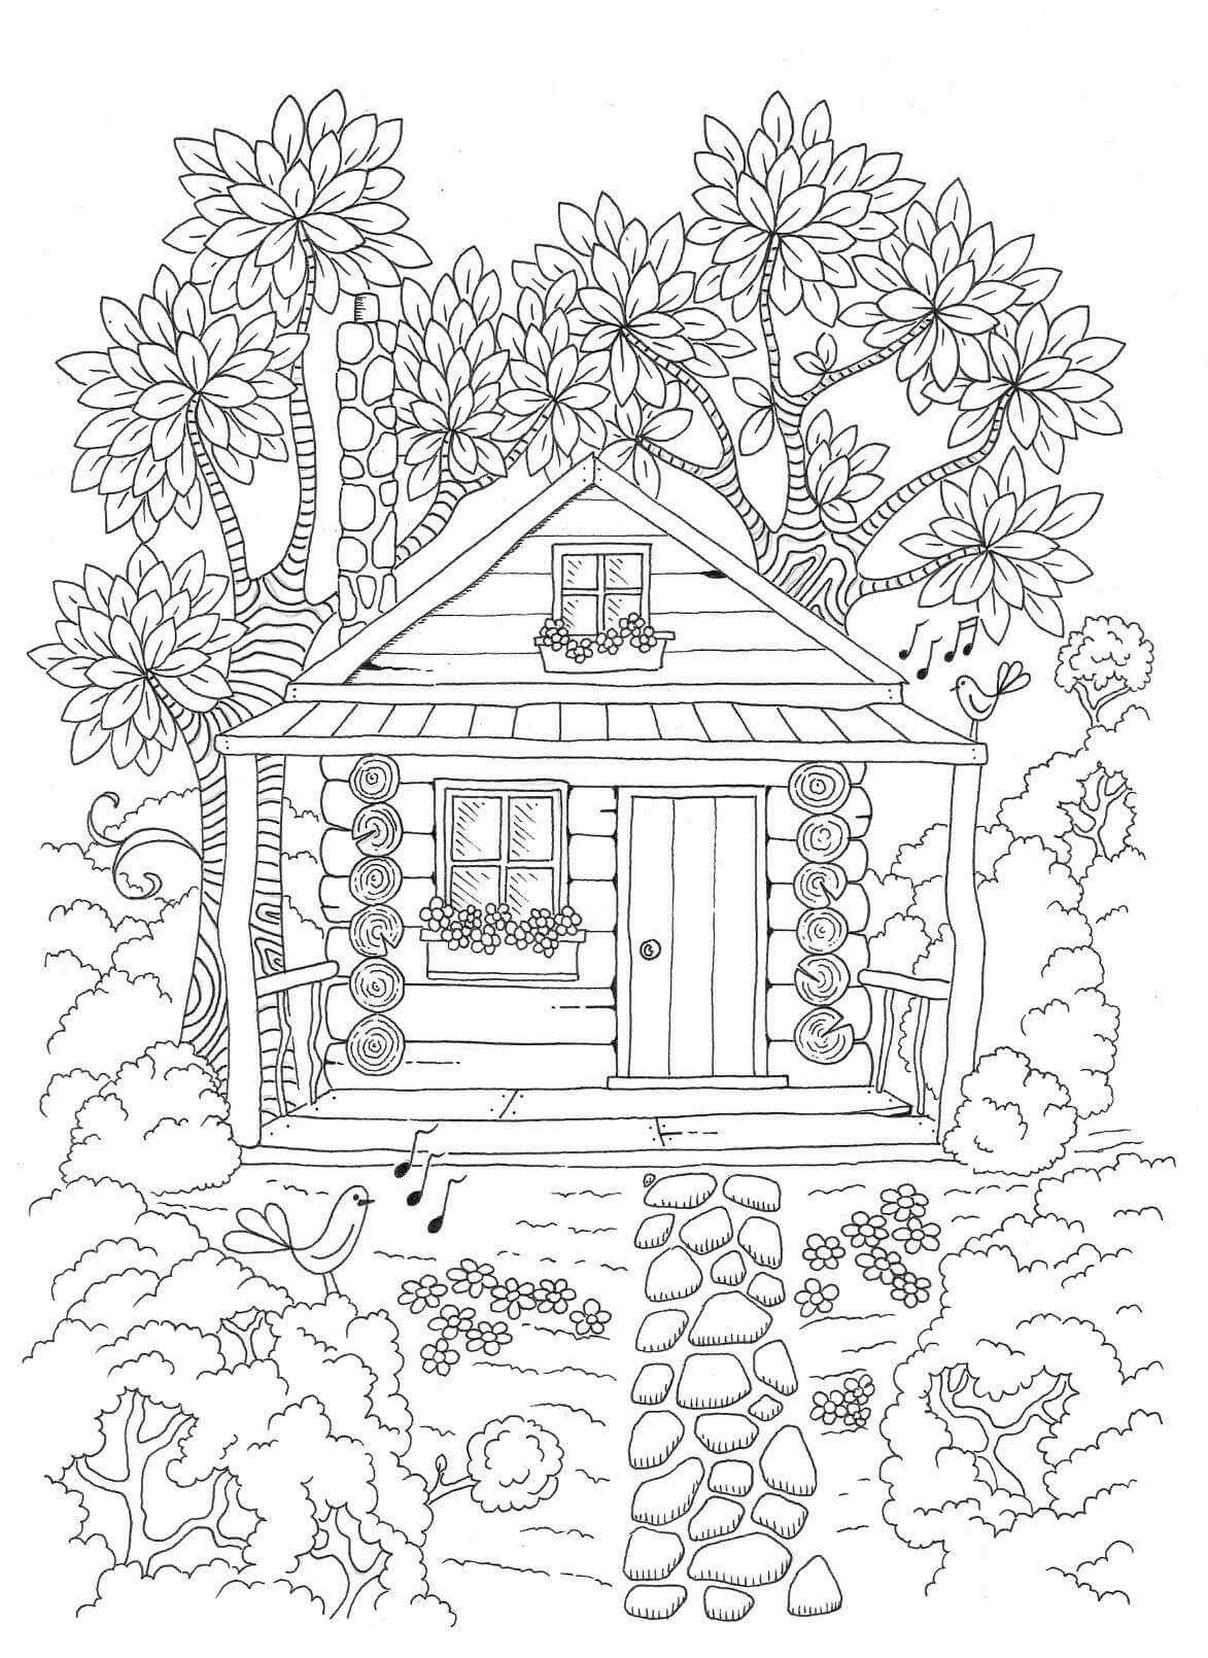 Coloring Book For Grown Ups Coloring Pages